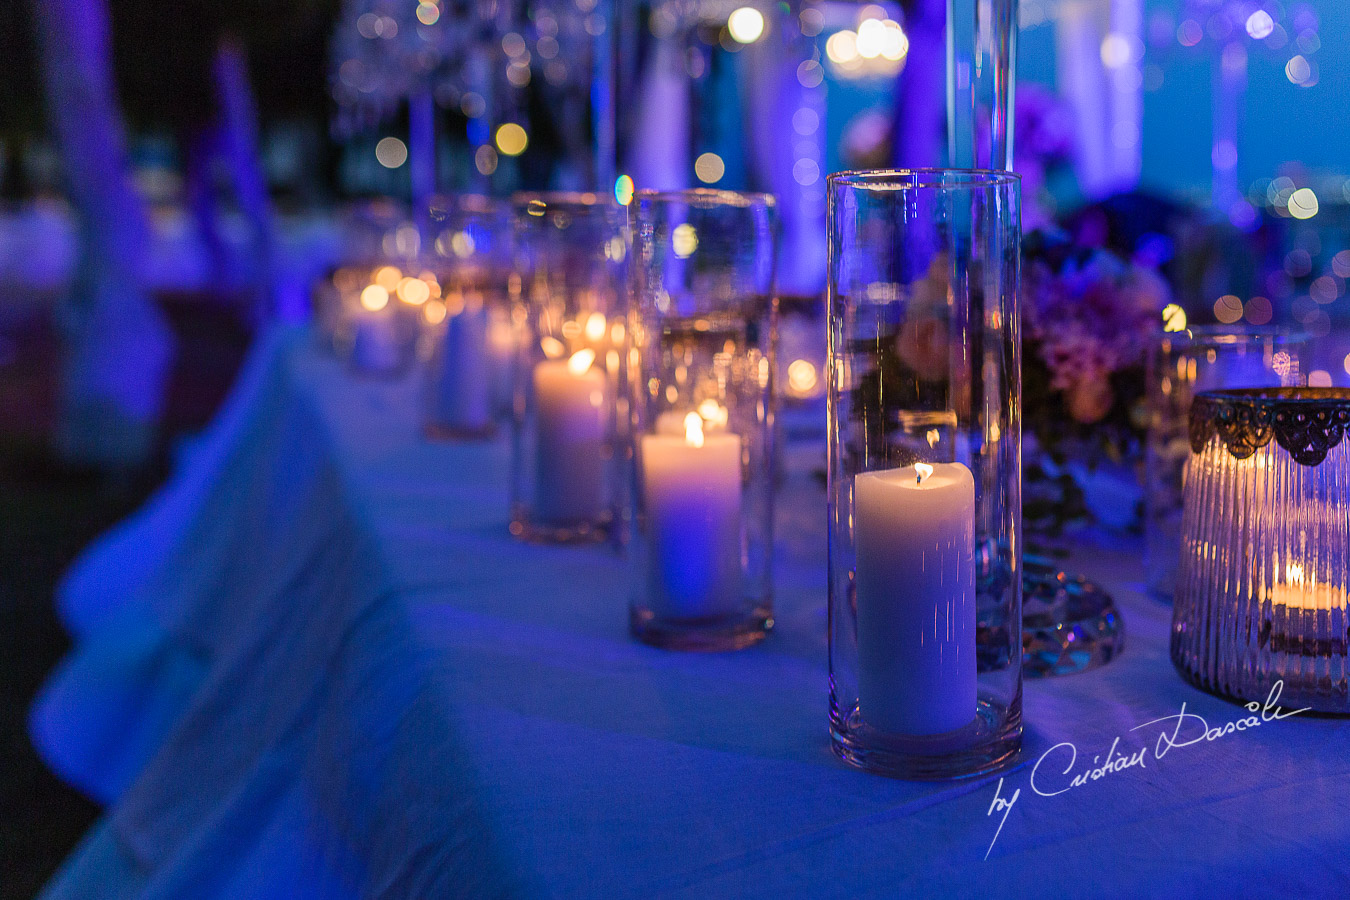 Lovely wedding details captured at an elegant and romantic wedding at Elias Beach Hotel by Cristian Dascalu.